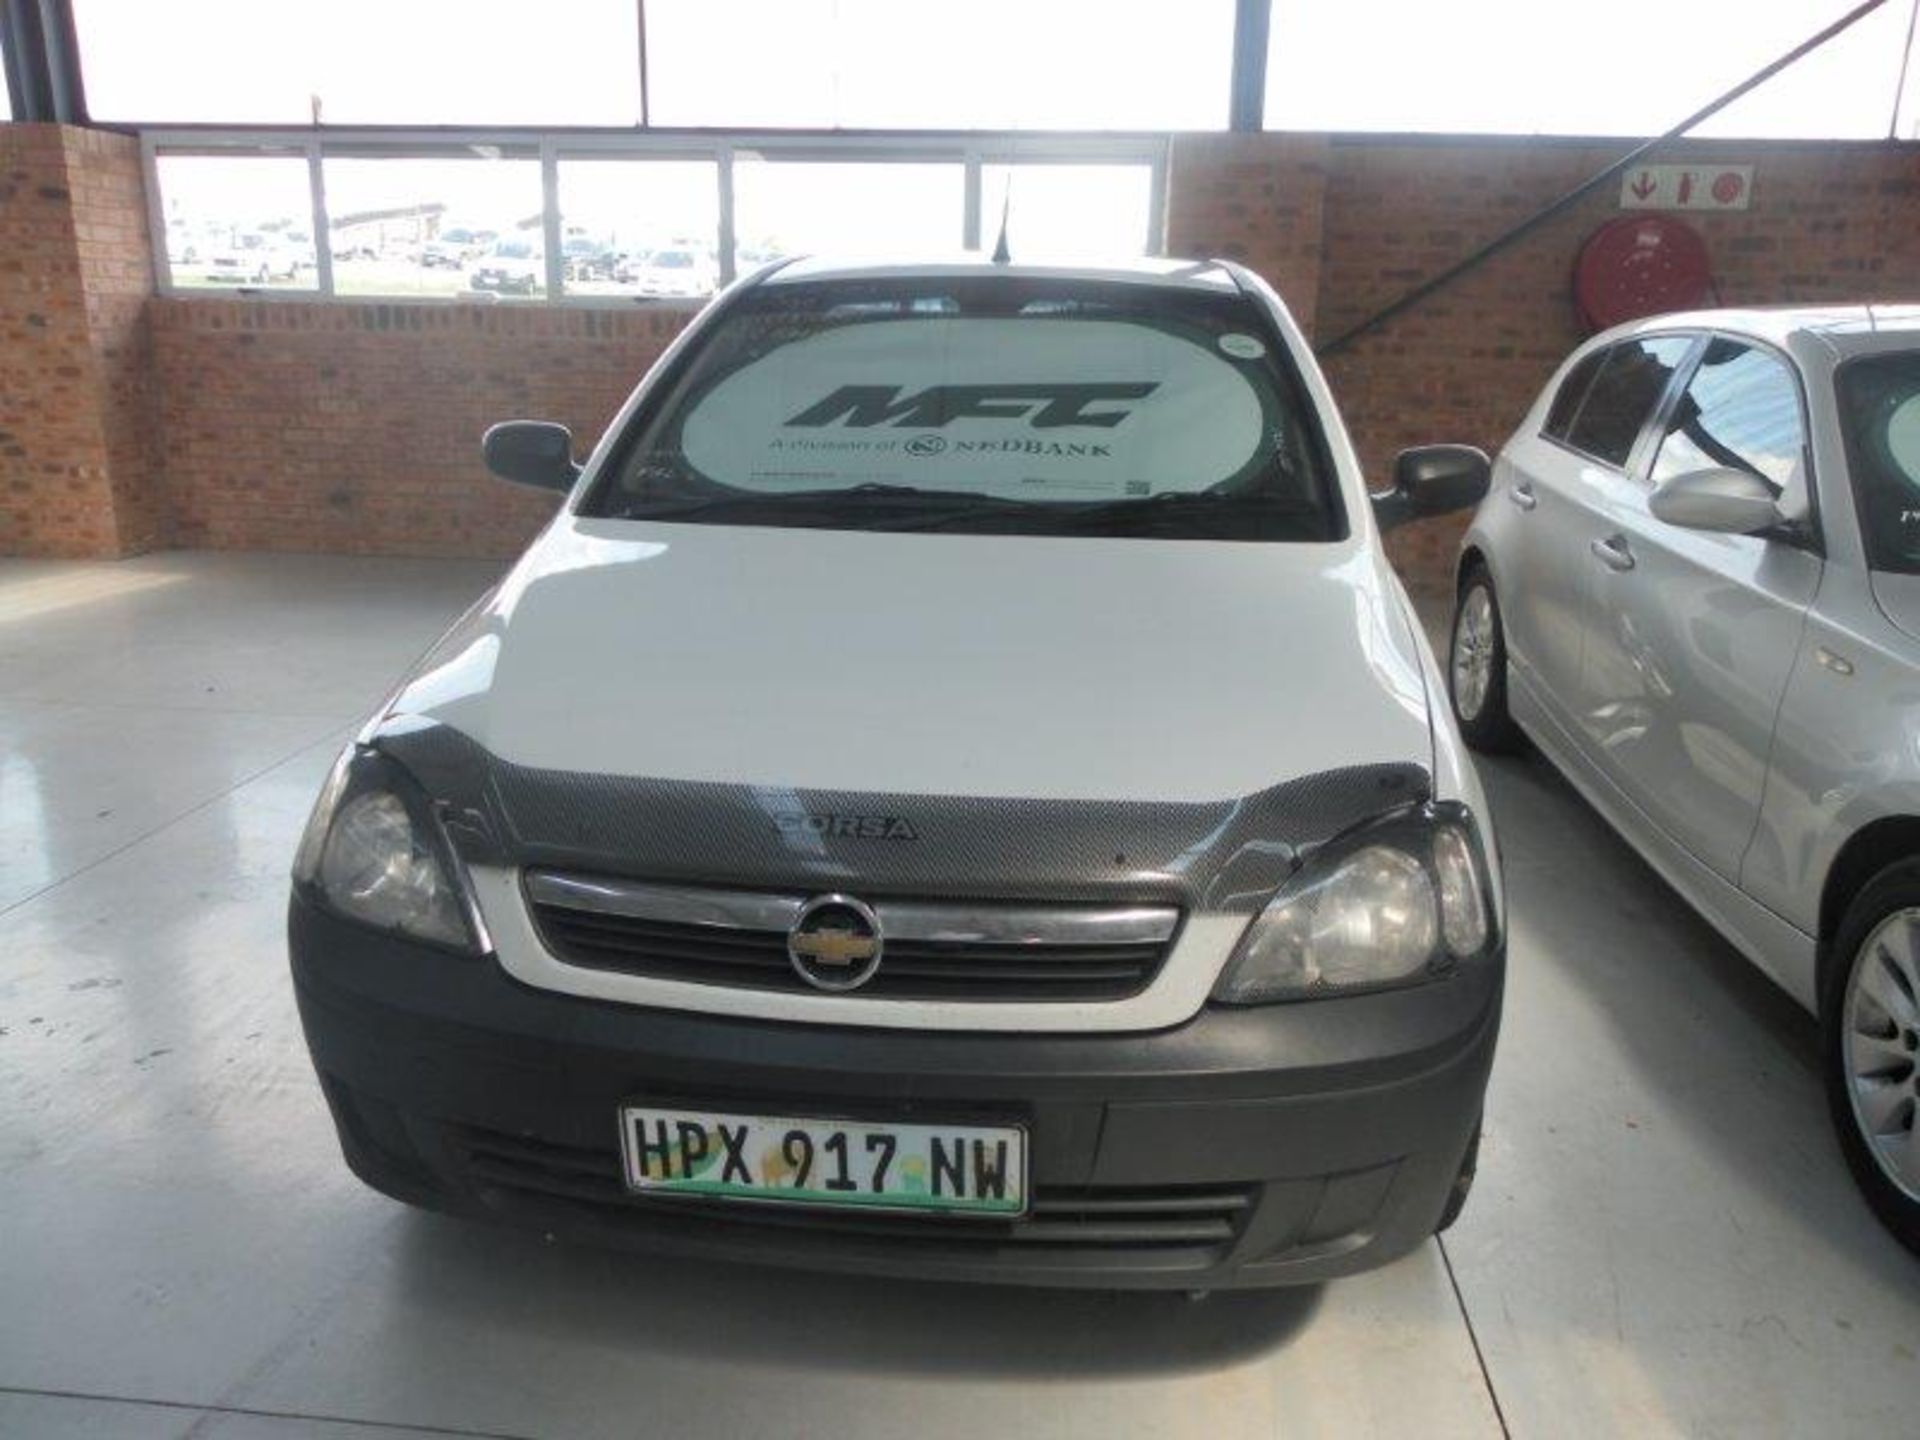 2011 HPX917NW Chevrolet Corsa Utility 1.4 (Vin No: ADMF80JJ84561058 )(91 305 kms) Windscreen - Image 2 of 3